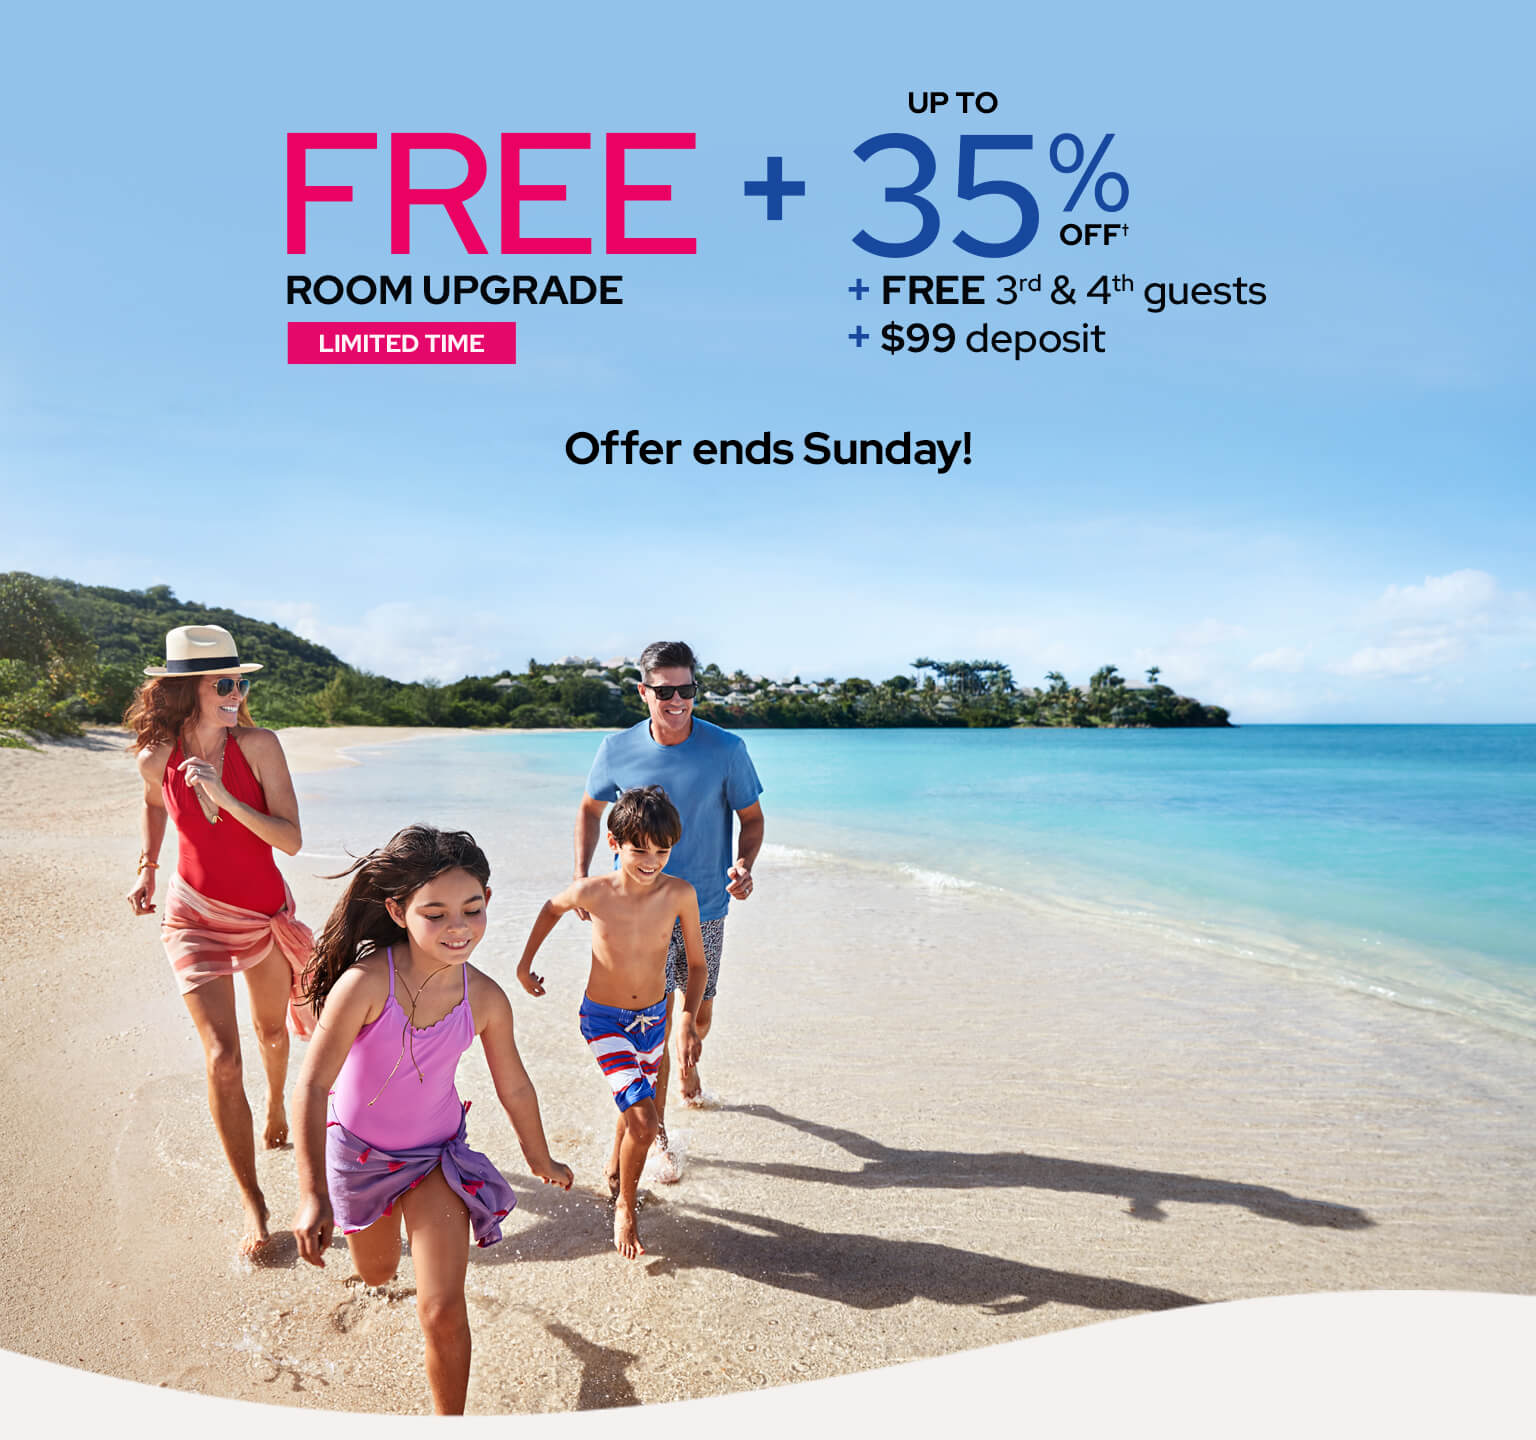 Free room upgrade, limited time. Plus up to 35% off† plus free 3rd and 4th guests plus $99 deposit. Offer ends Sunday!